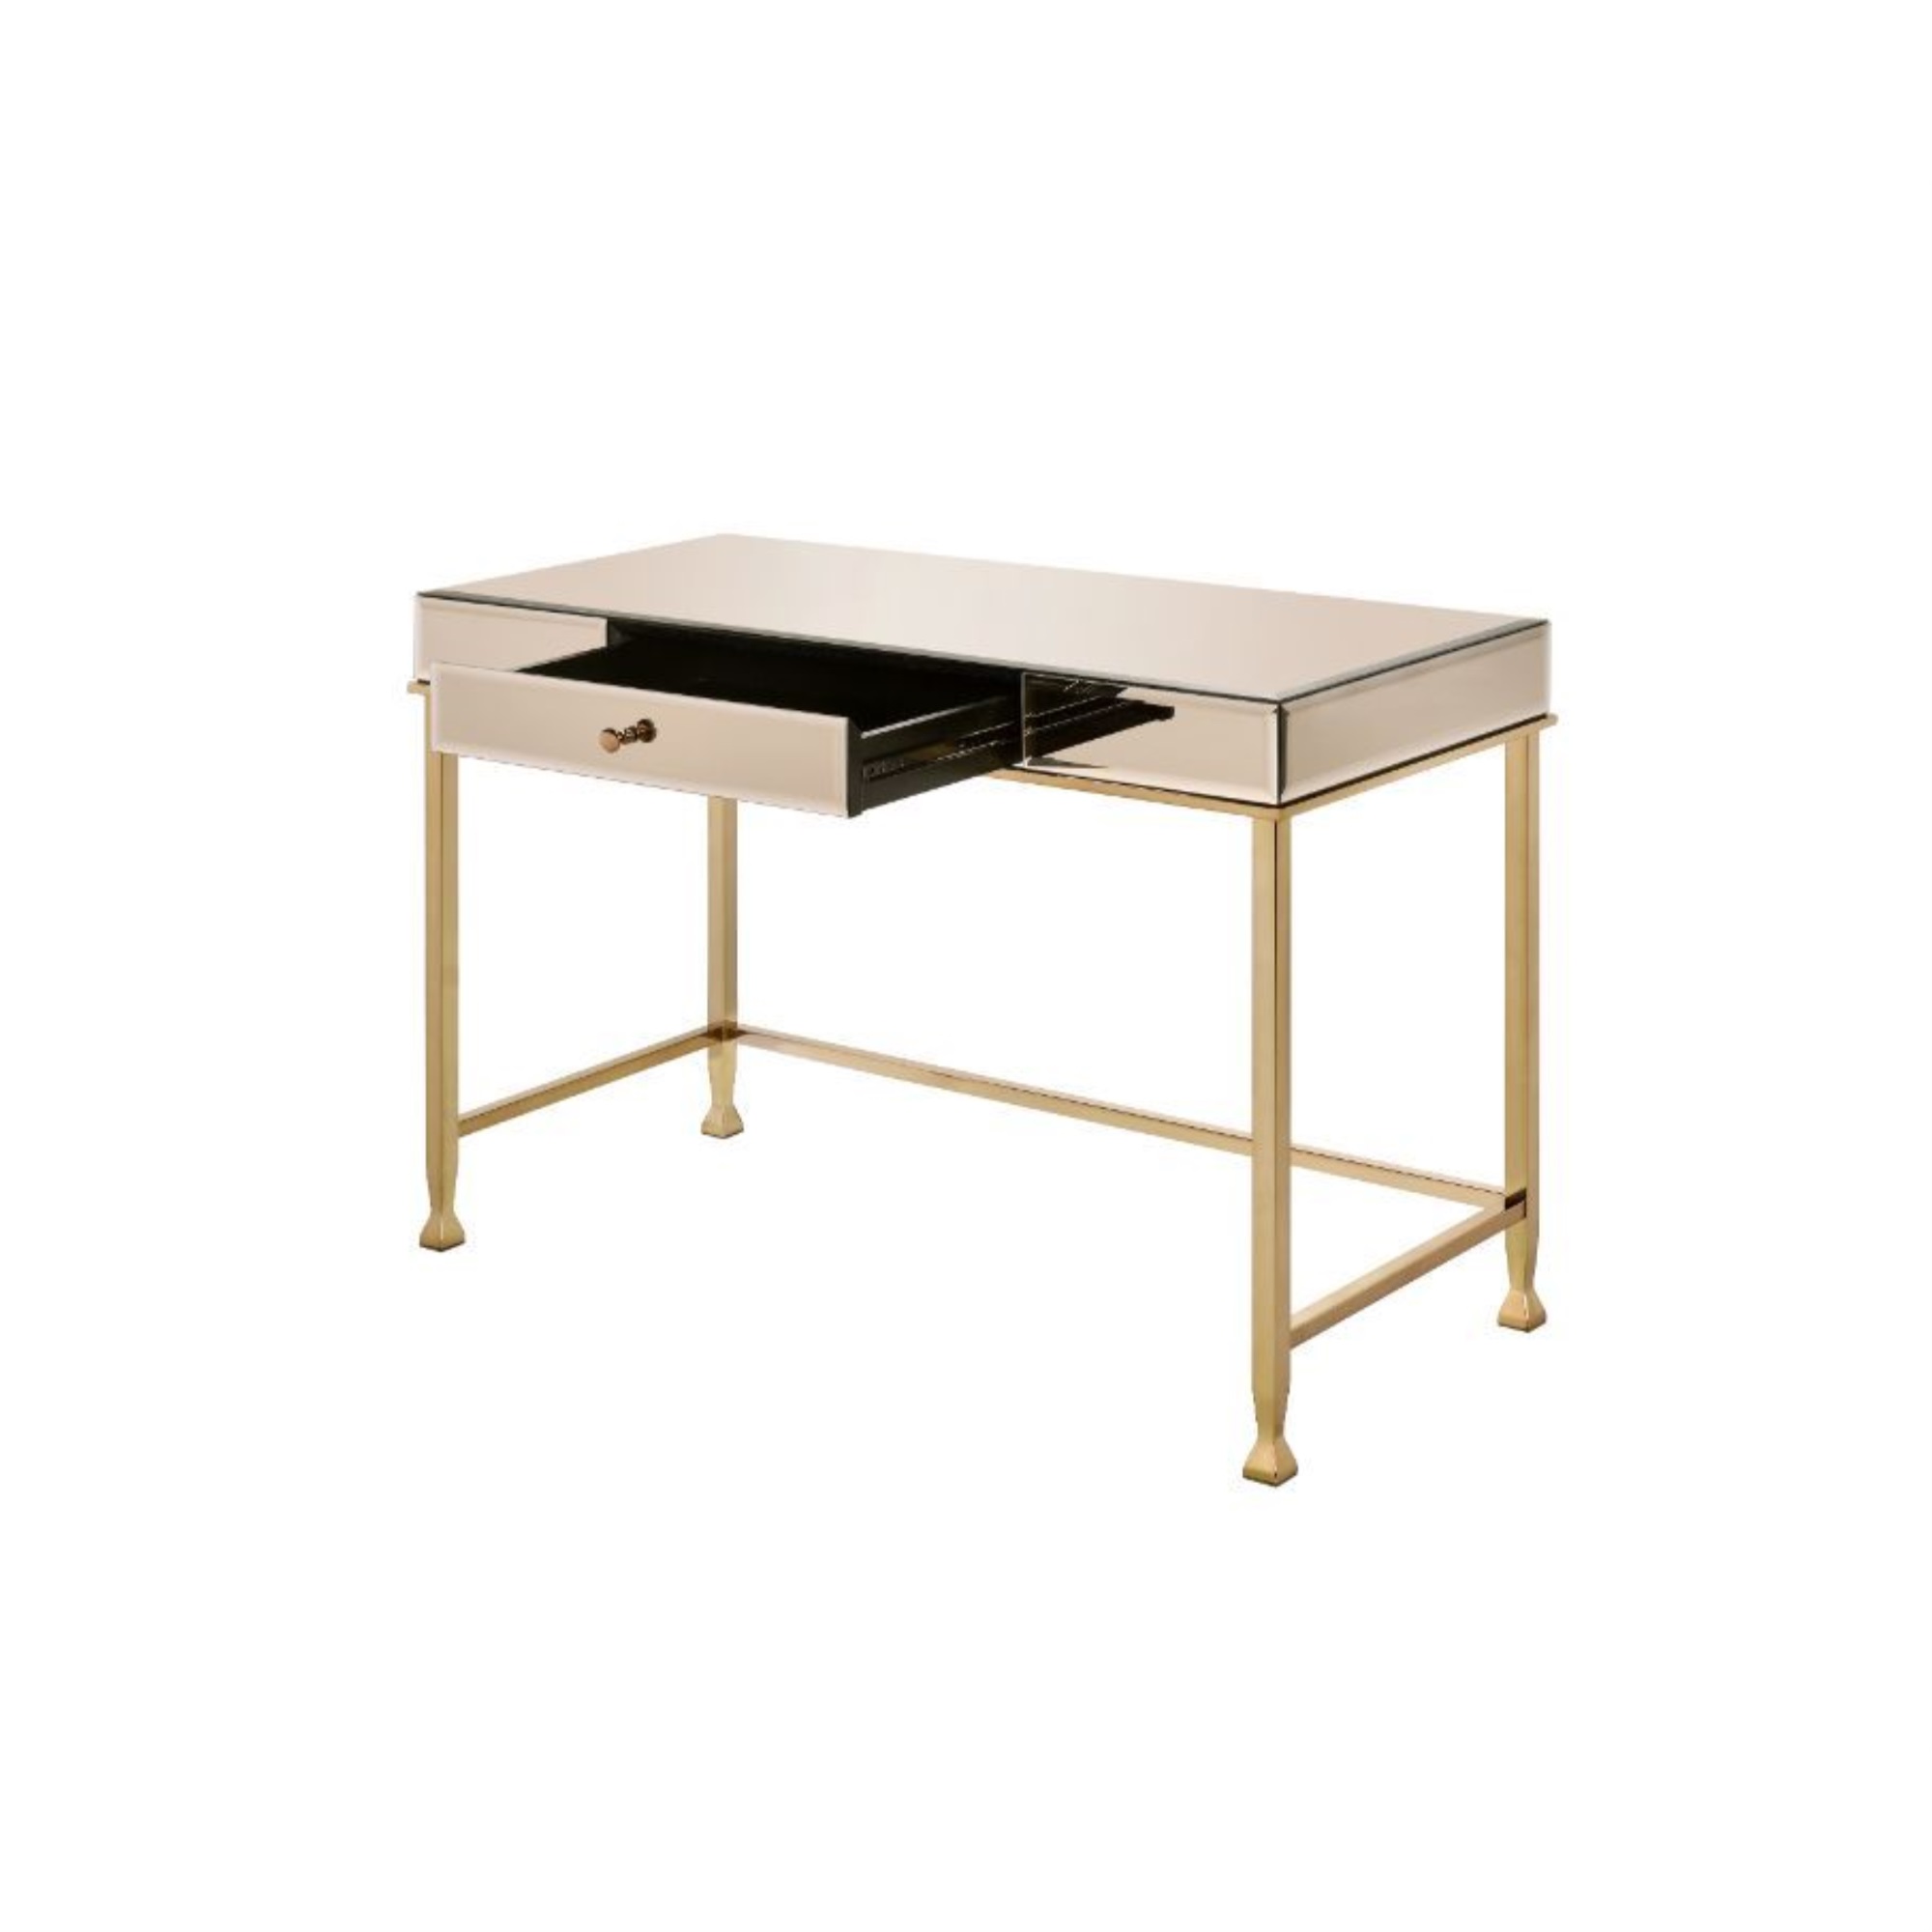 Acme Furniture Writing Desk, Smoky Mirroed and Champagne Finish